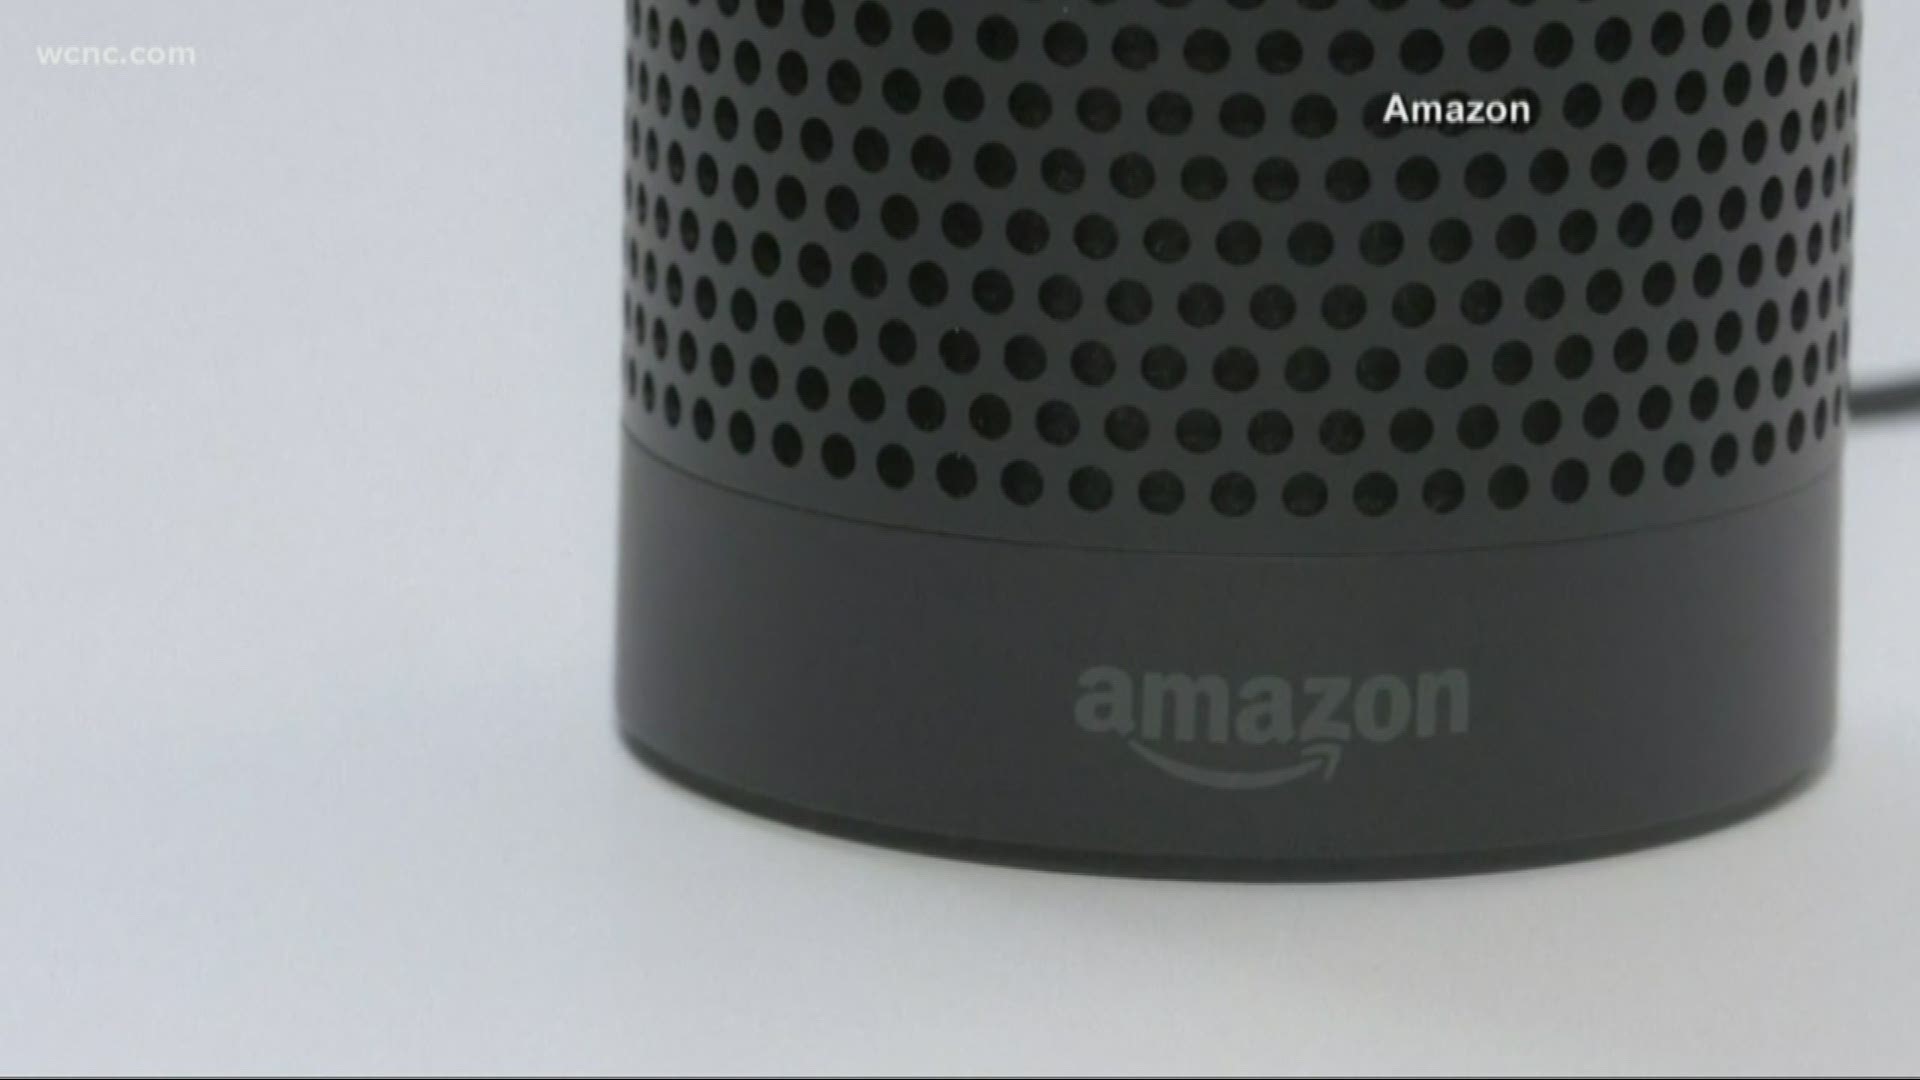 Forget simple tasks, like adding something to your shopping list or setting an alarm. Amazon wants Alexa to basically become your full-blown home assistant.